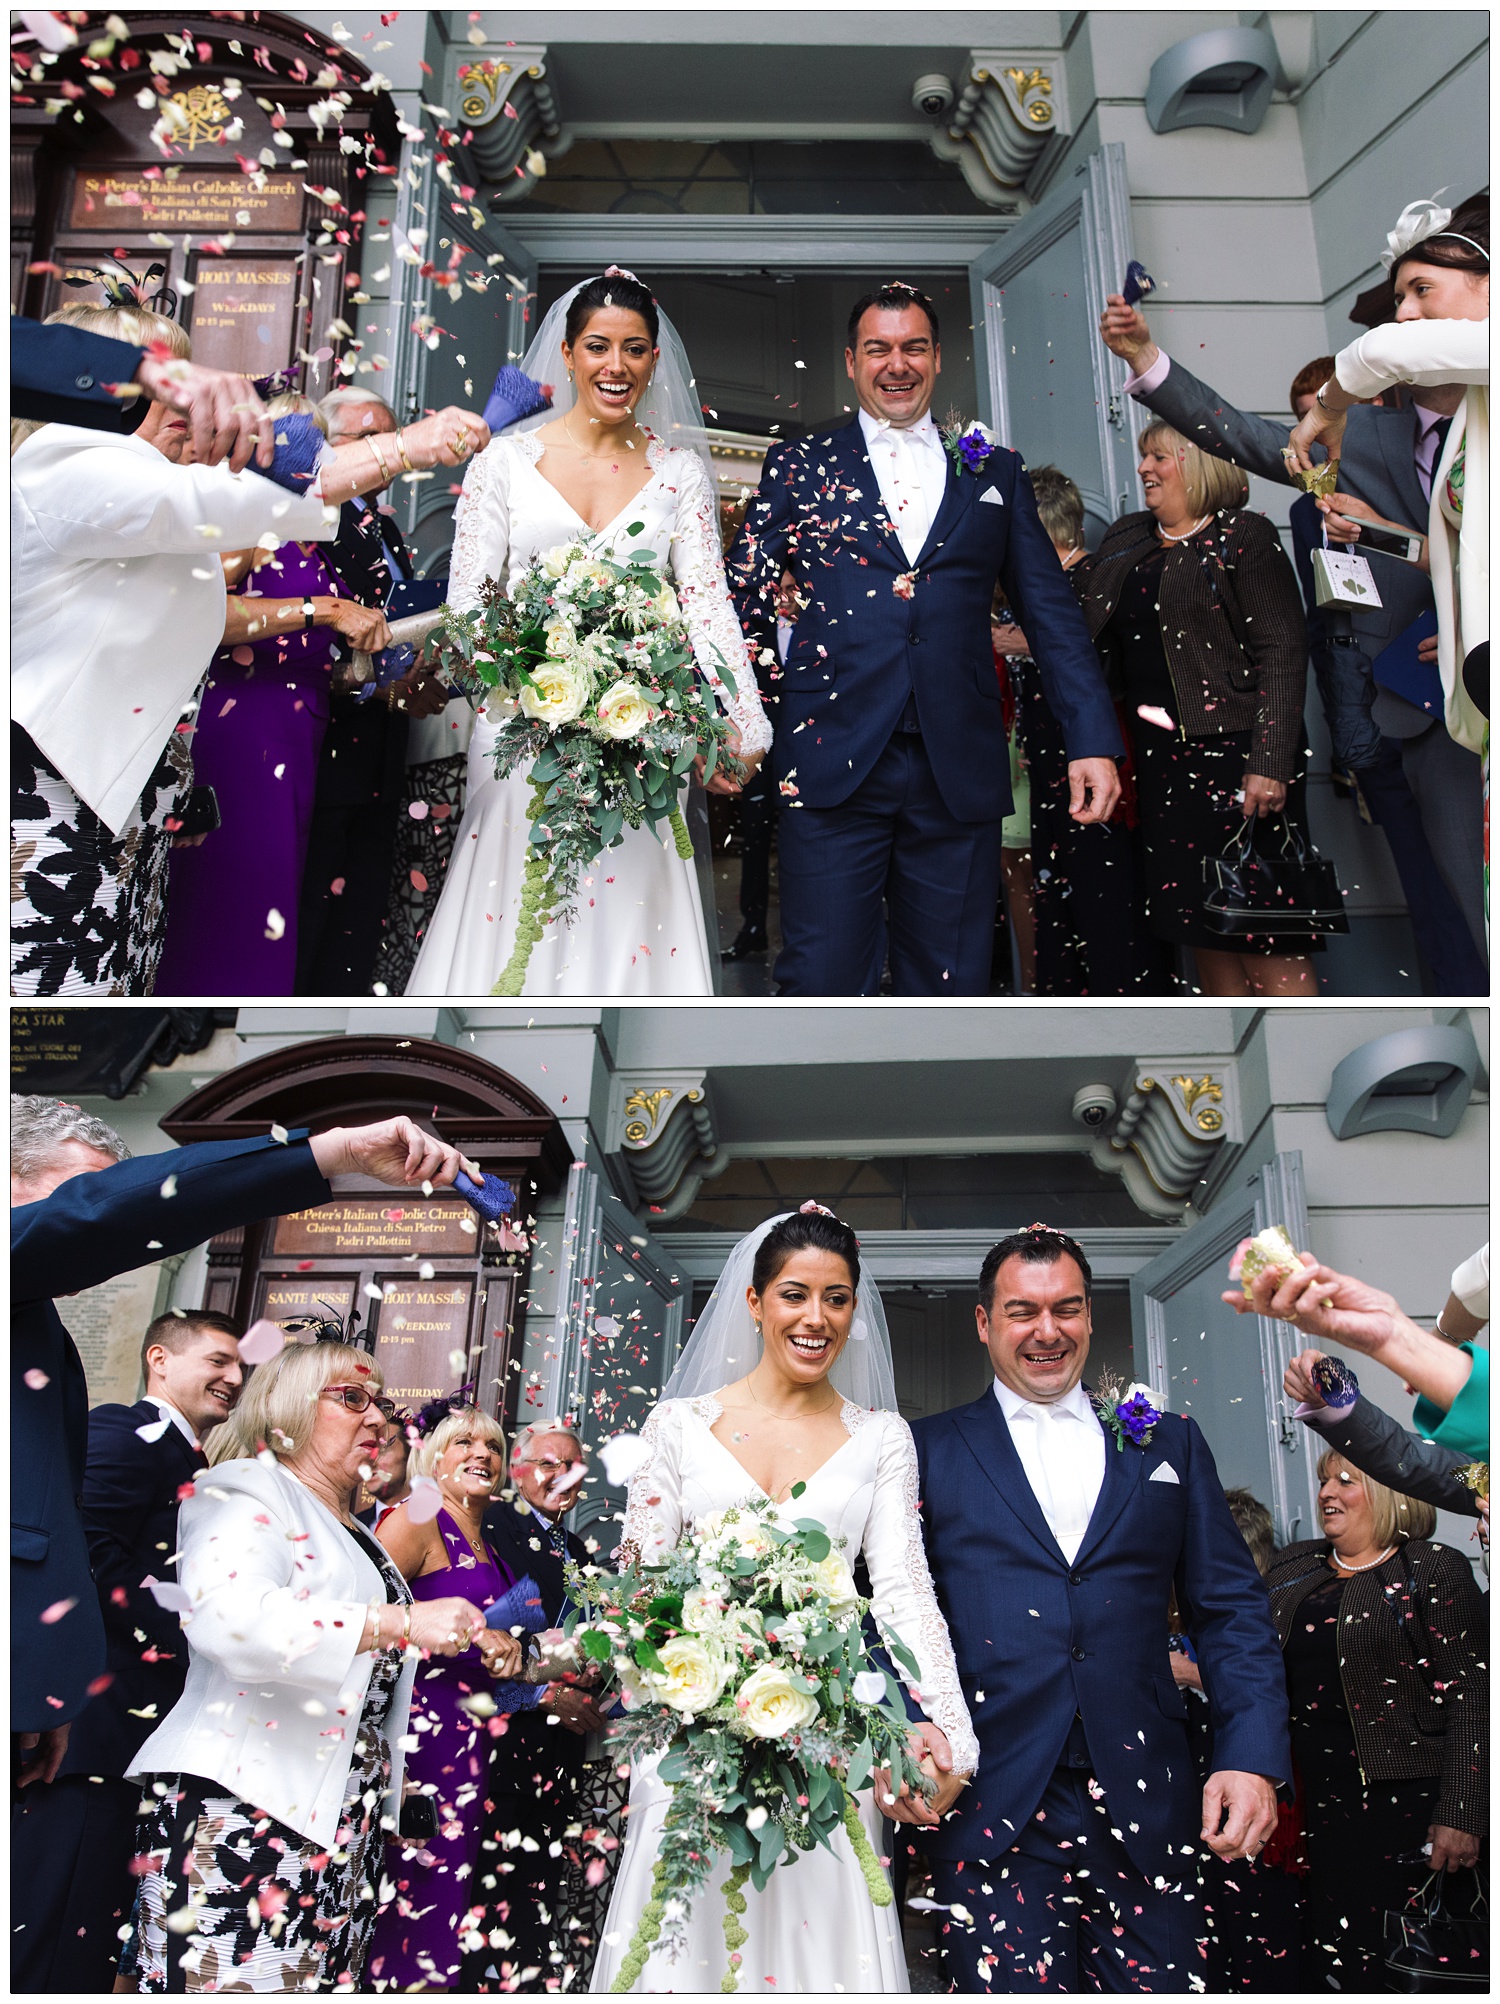 People throwing confetti at a newly married couple leaving the St Peter's Italian Church.